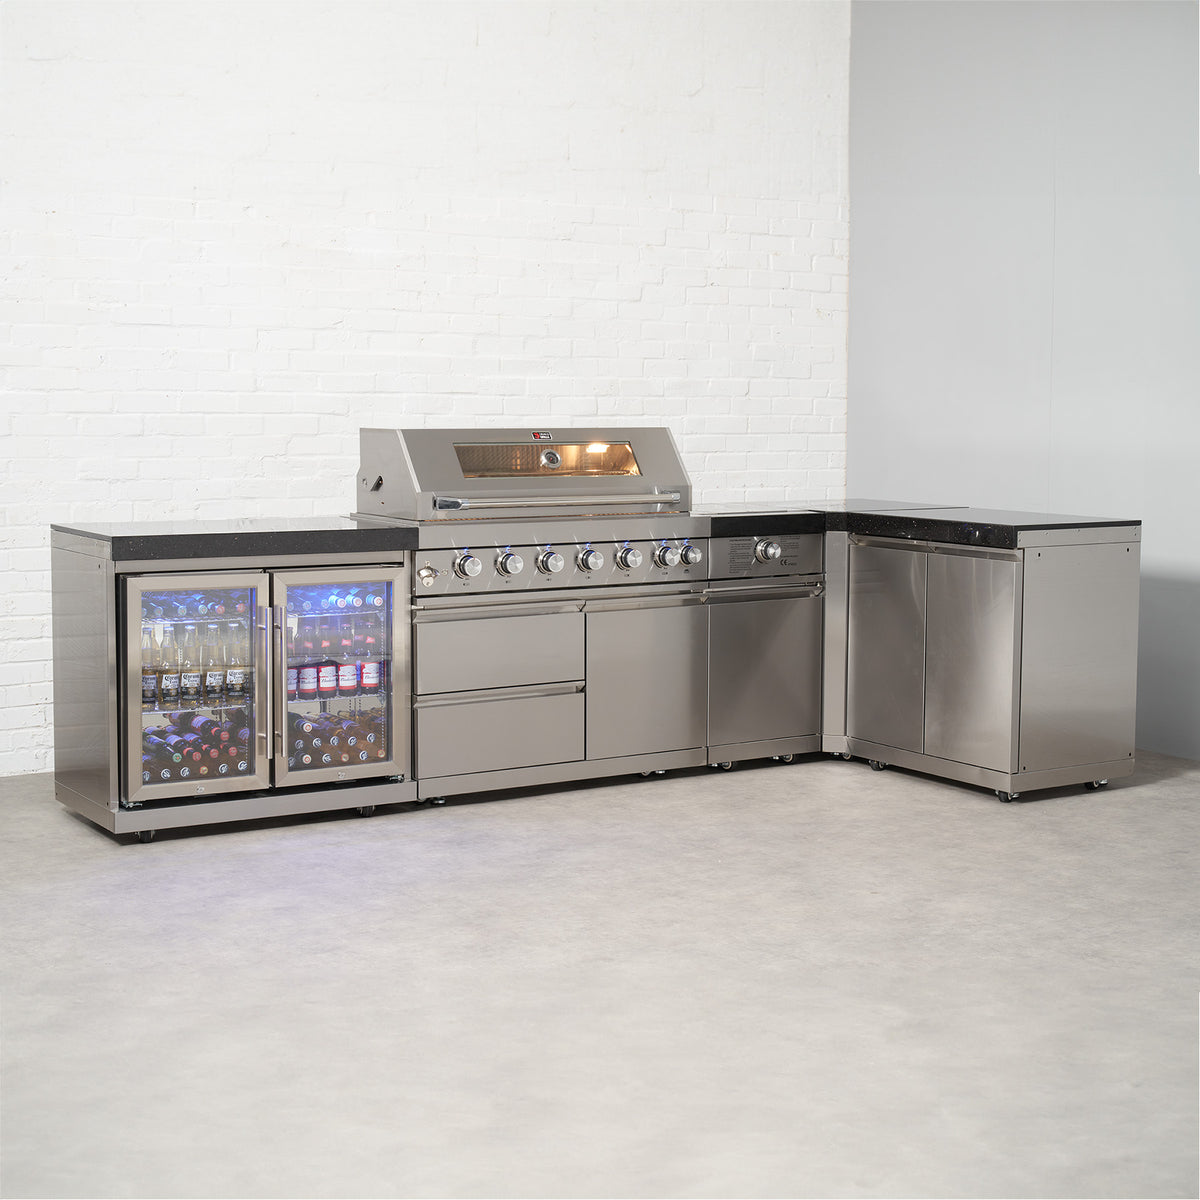 Draco Grills 6 Burner BBQ Modular Outdoor Kitchen with Sear Station, Double Cupboard and Double Fridge